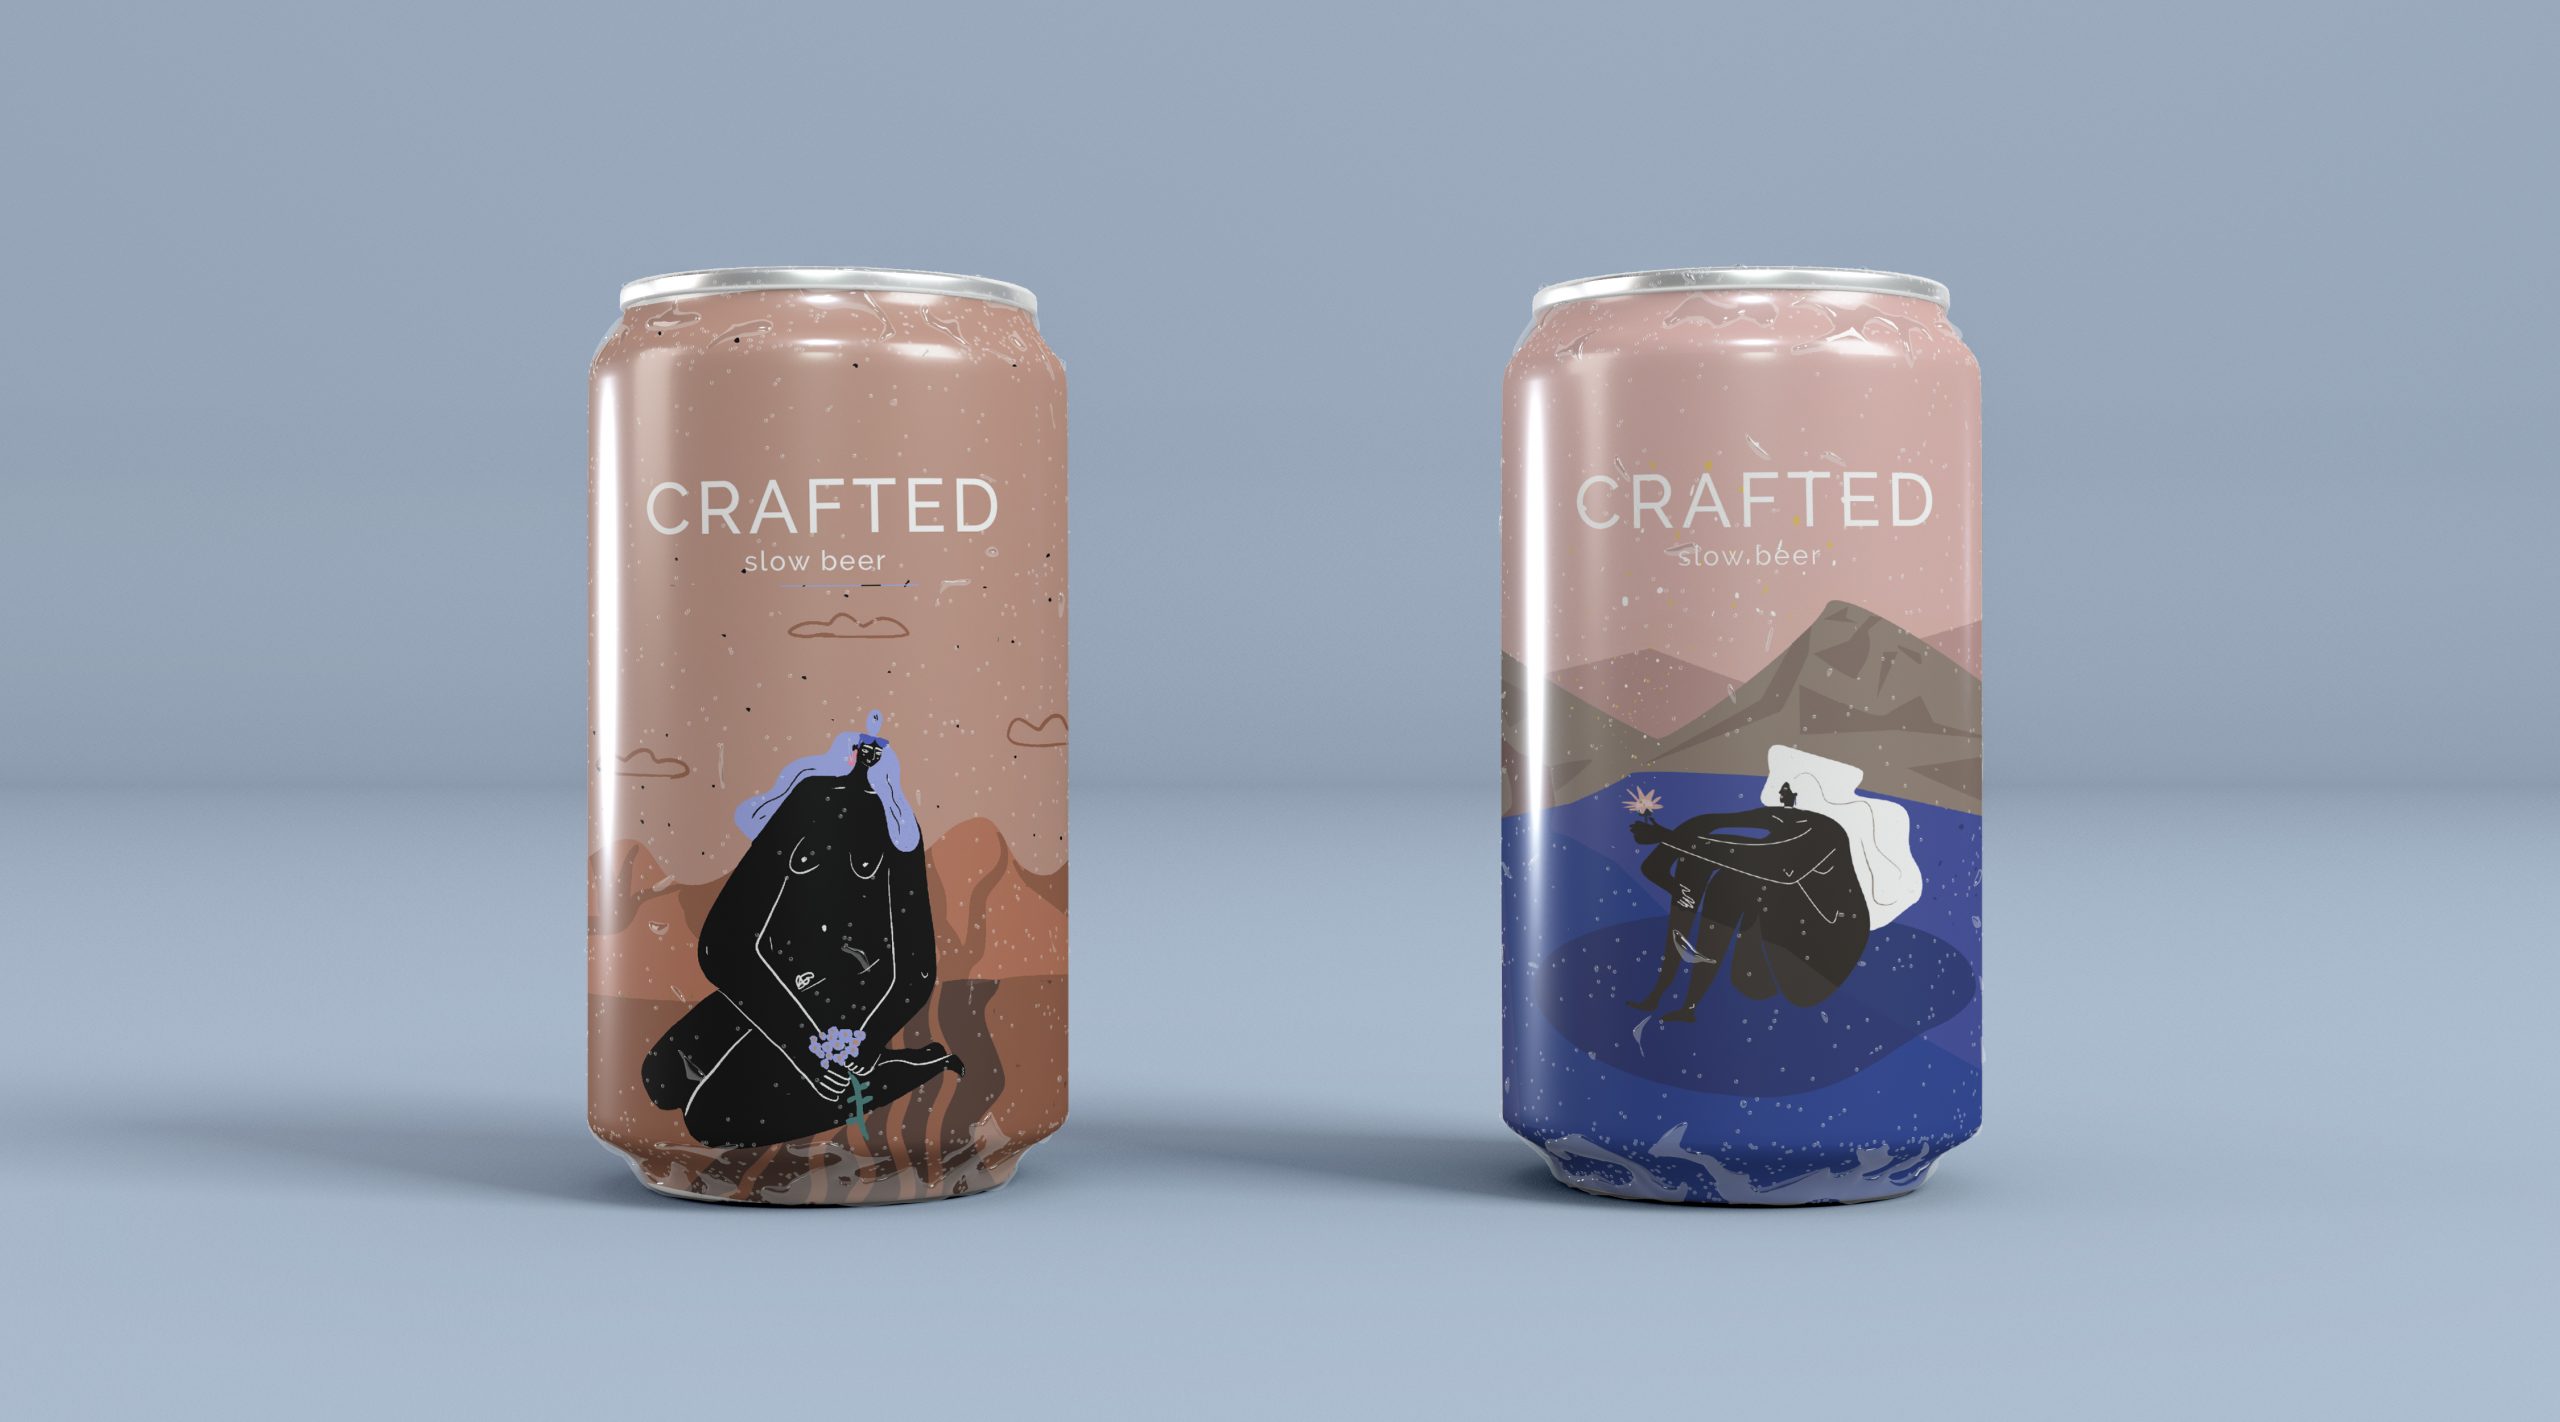 CRAFTED – slow beer